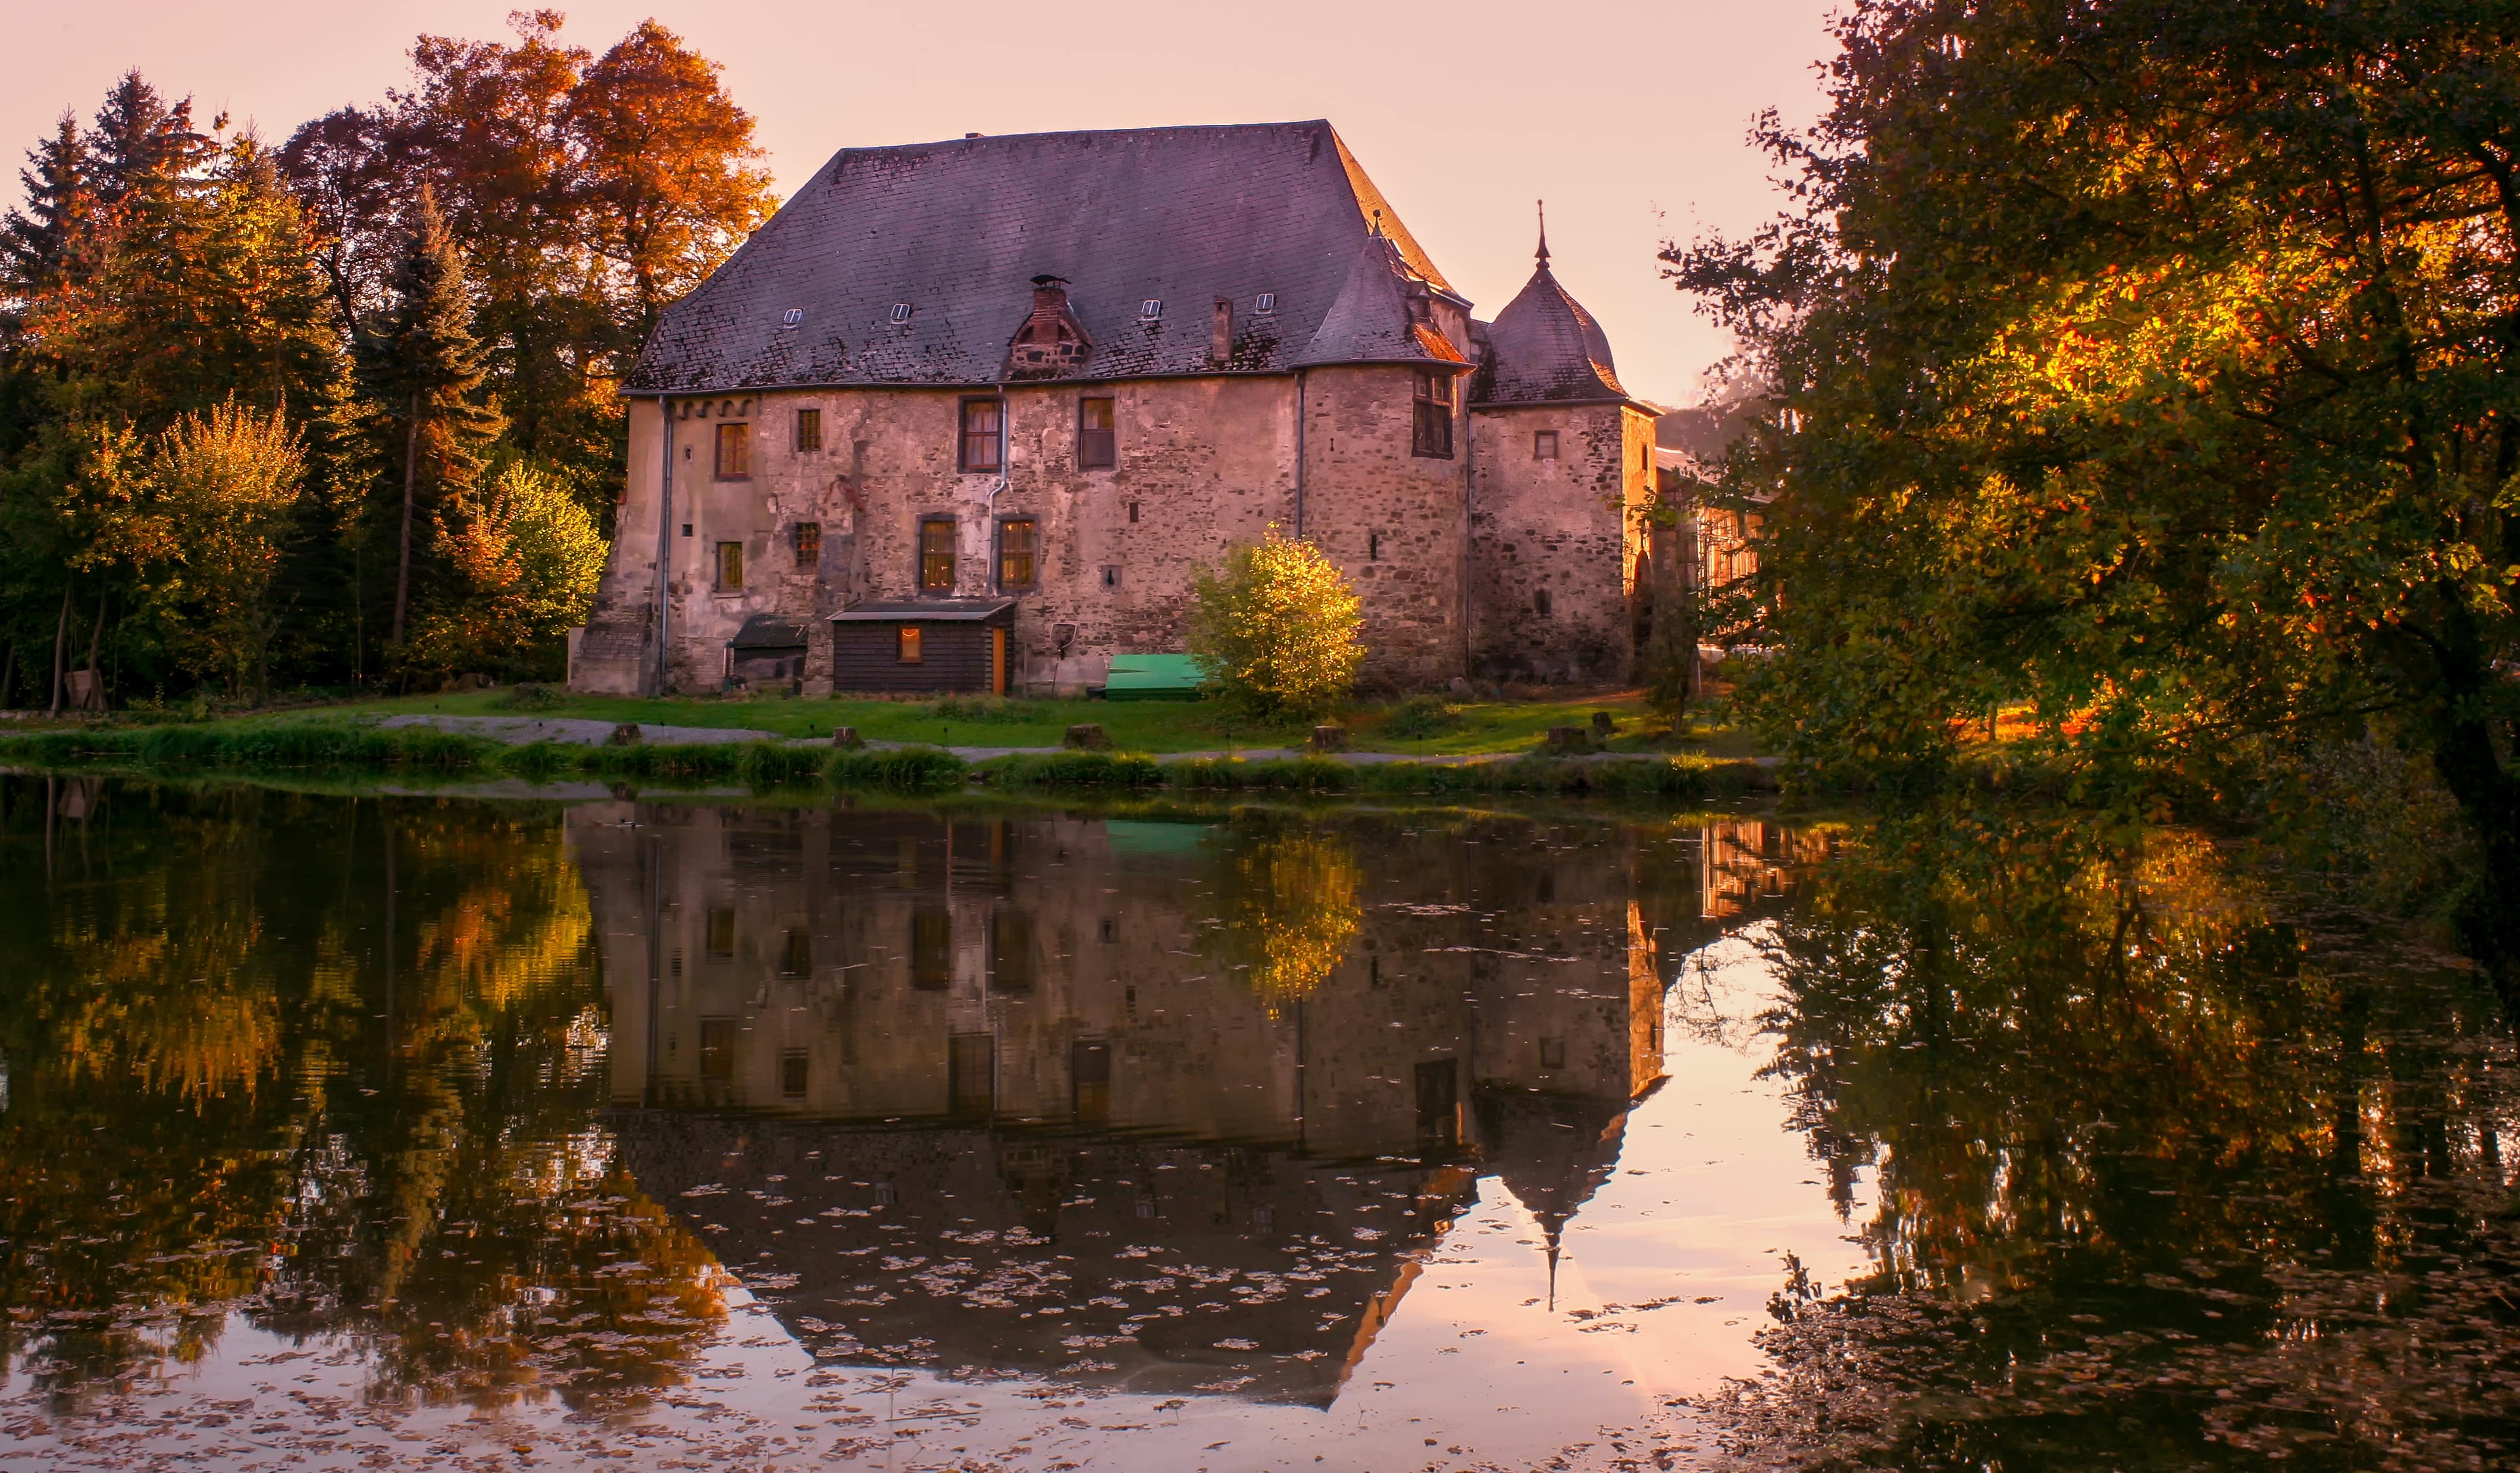 Treat your kids to an unusual holiday by staying in a castle